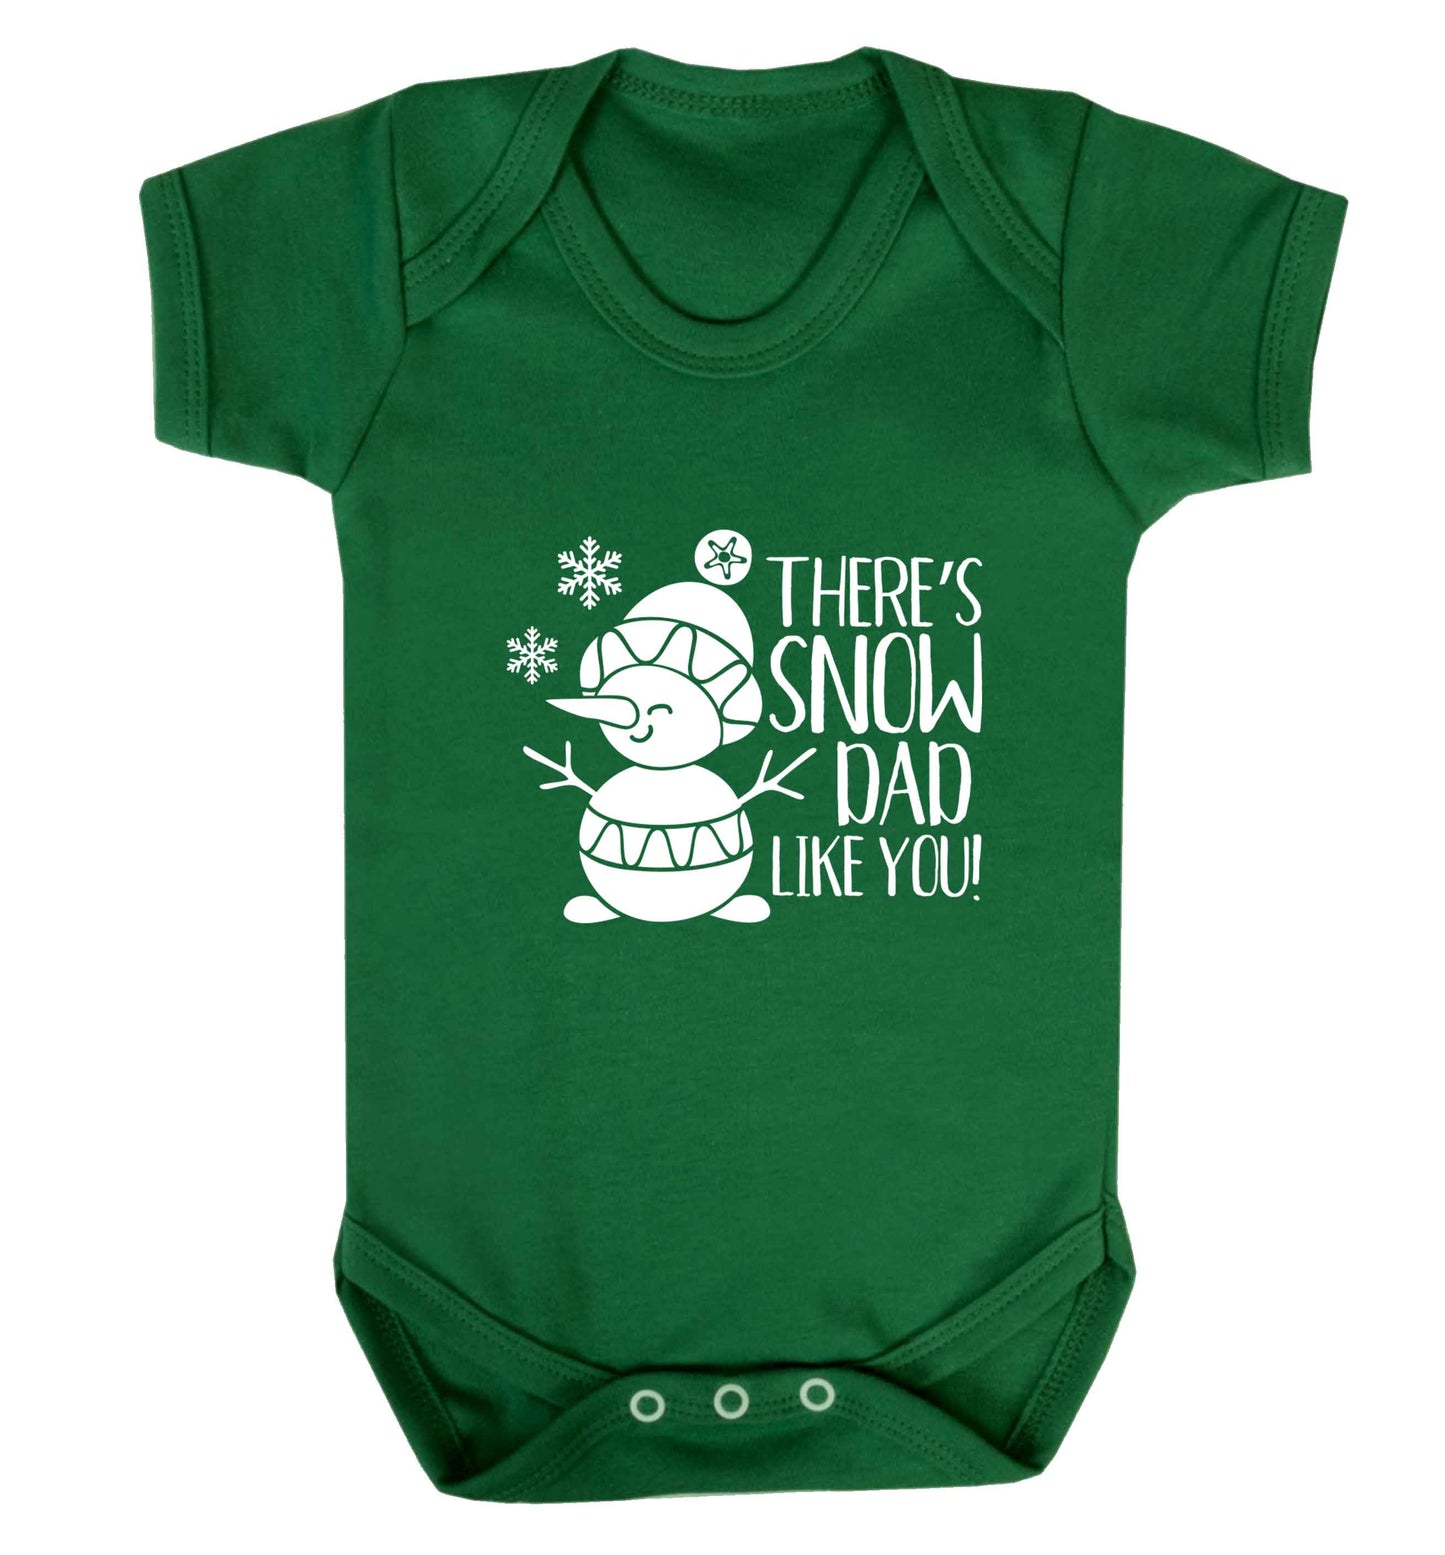 There's snow dad like you baby vest green 18-24 months